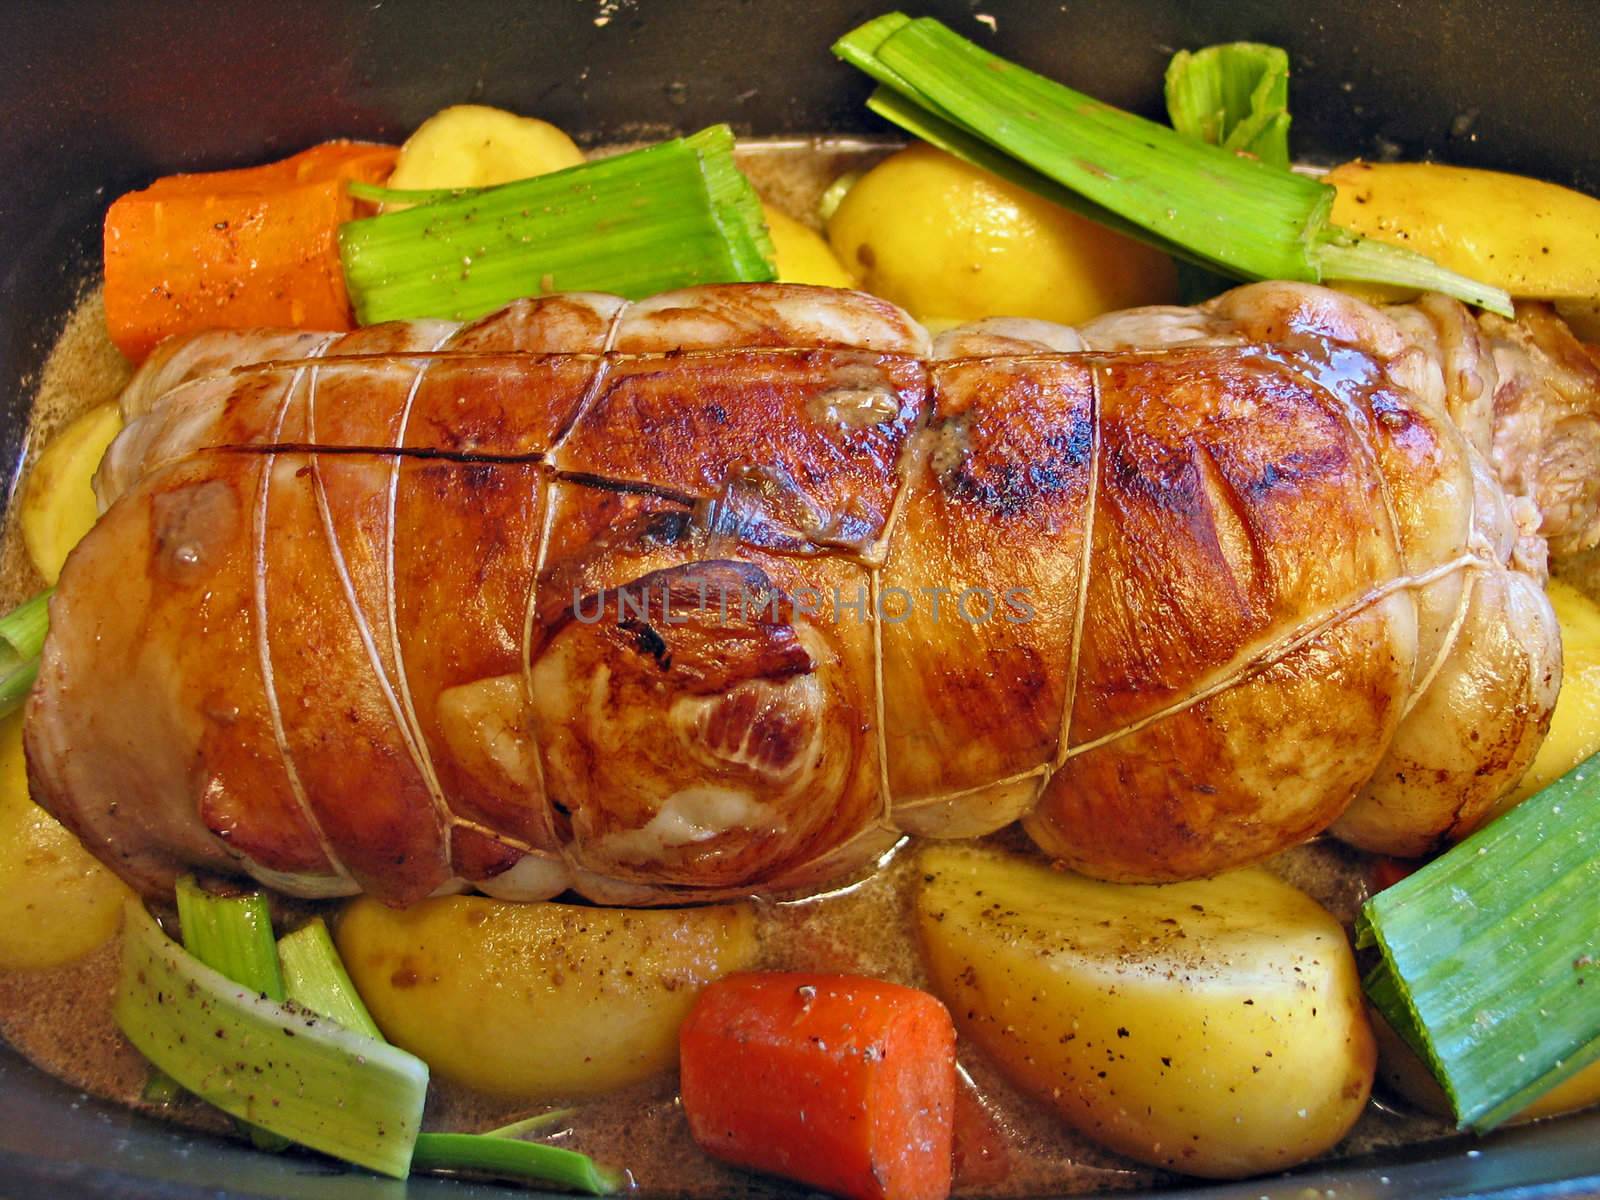 Oven roasted meat with vegetables